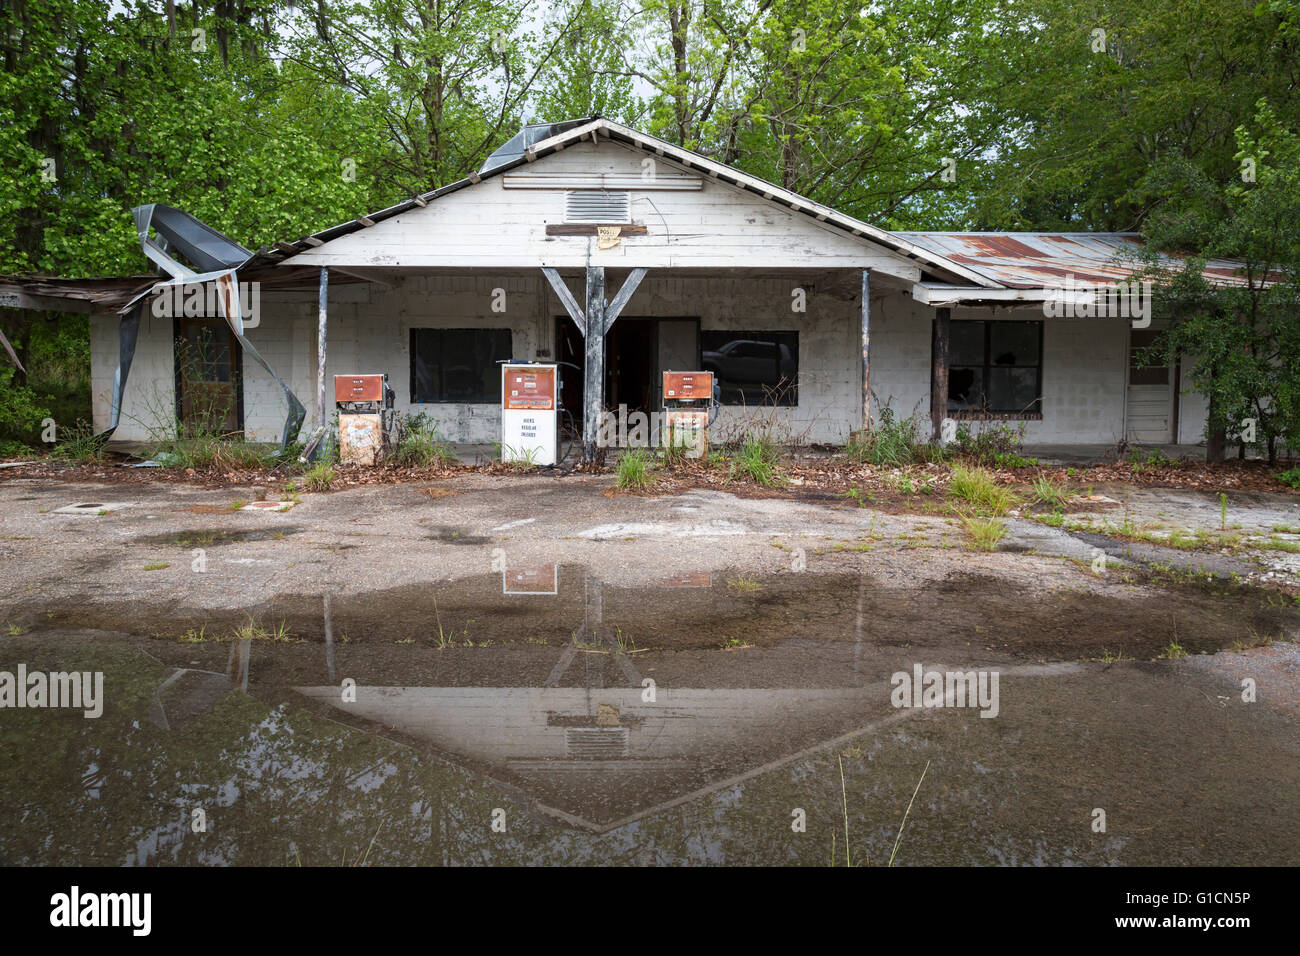 Eddy, Florida - Abandoned gas station at the edge of the Okefenokee Swamp. Stock Photo